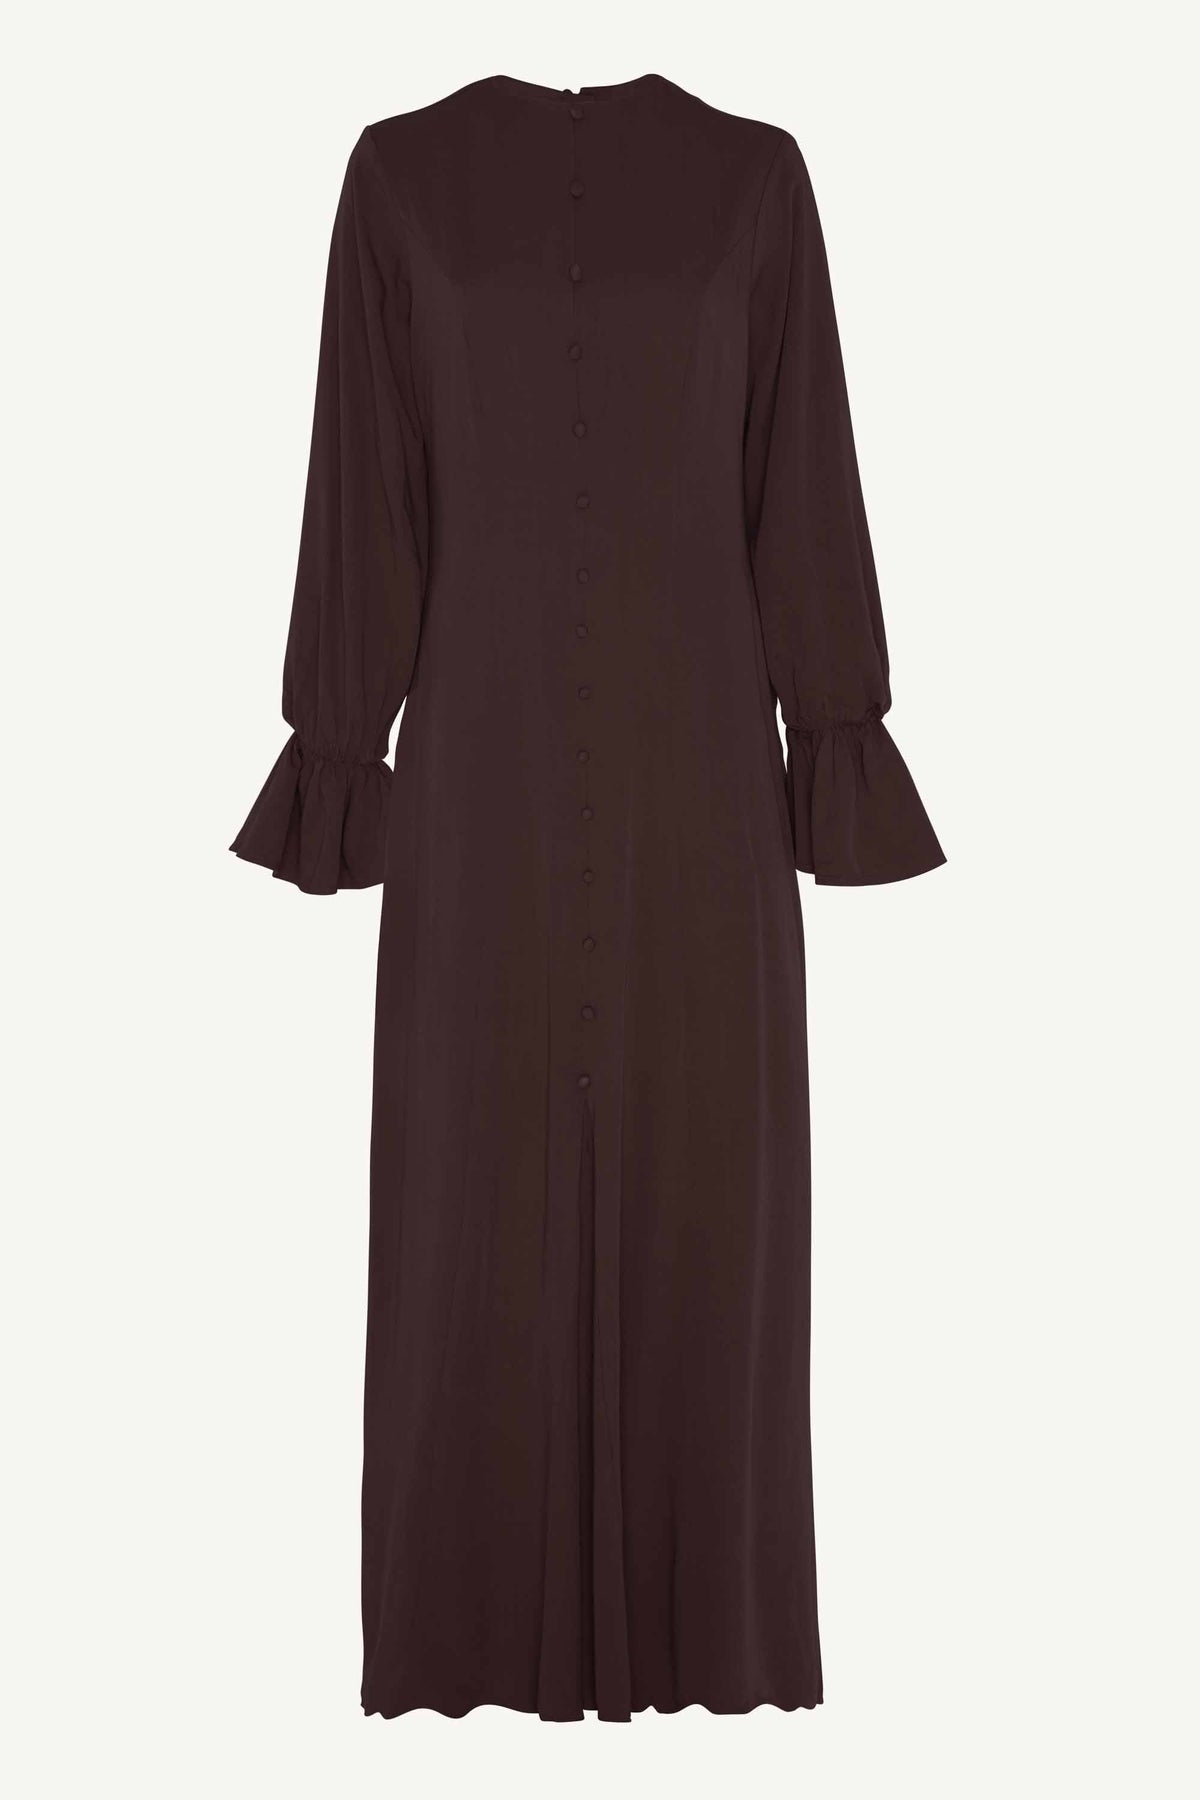 Deanna Button Front Maxi Dress - Brown Clothing Veiled Collection 